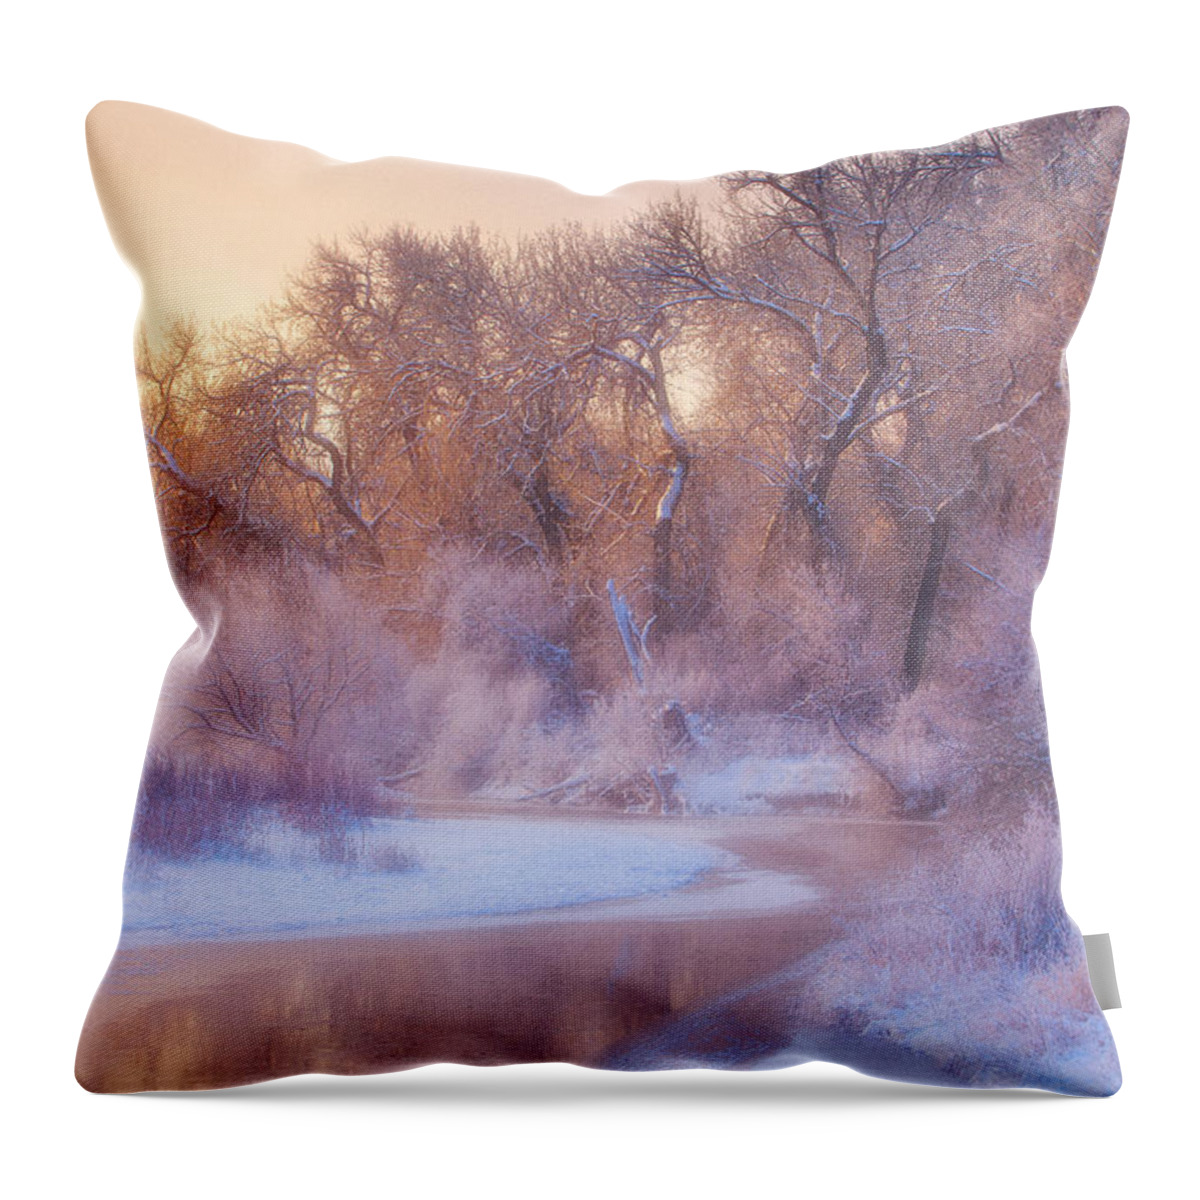 Ice Throw Pillow featuring the photograph The Warmth of Winter by Darren White